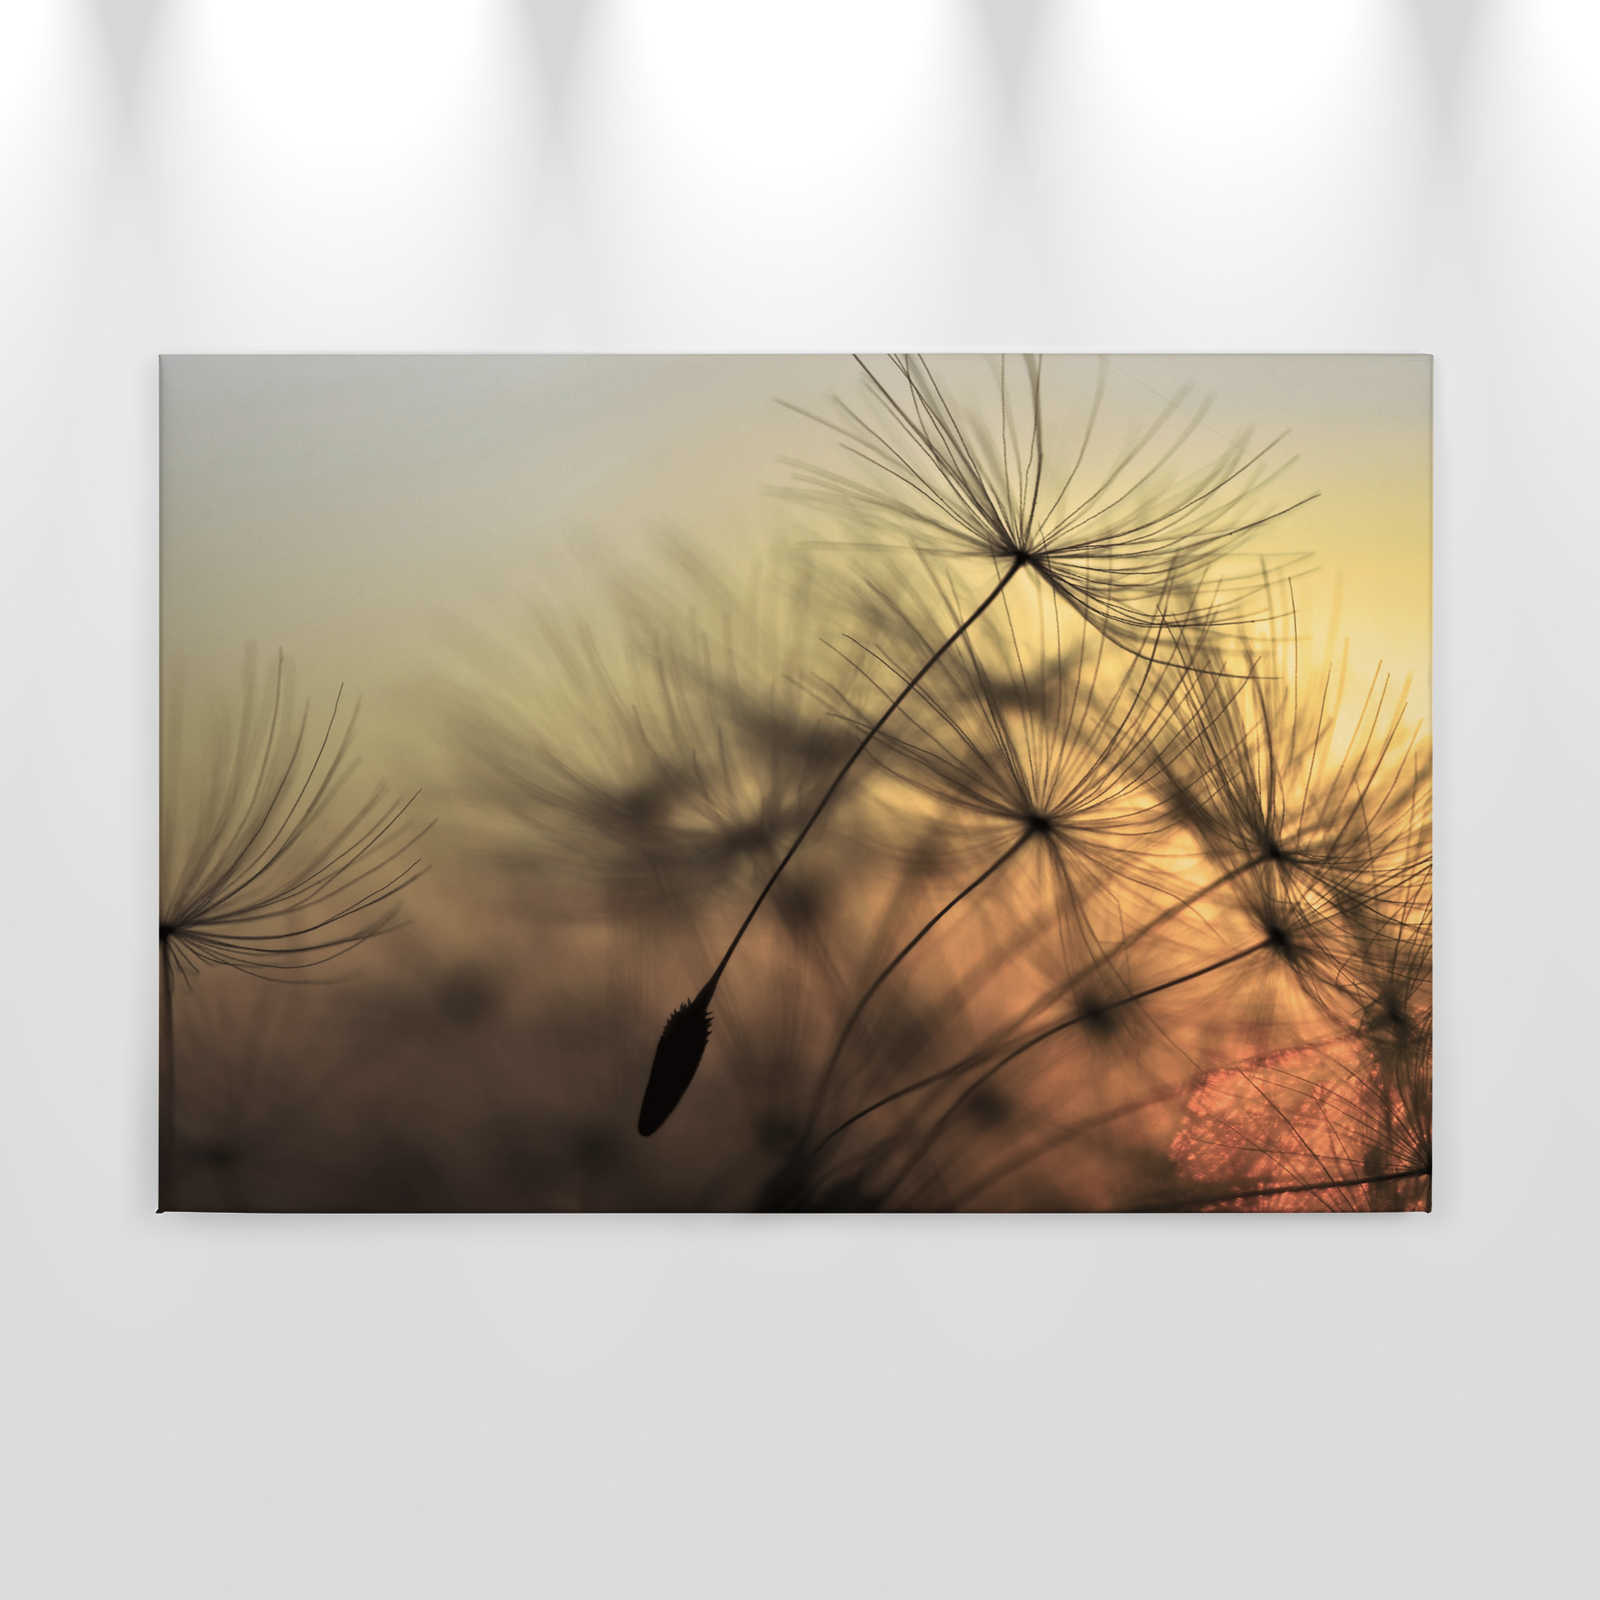             Canvas with flying dandelion in sunset - 0.90 m x 0.60 m
        